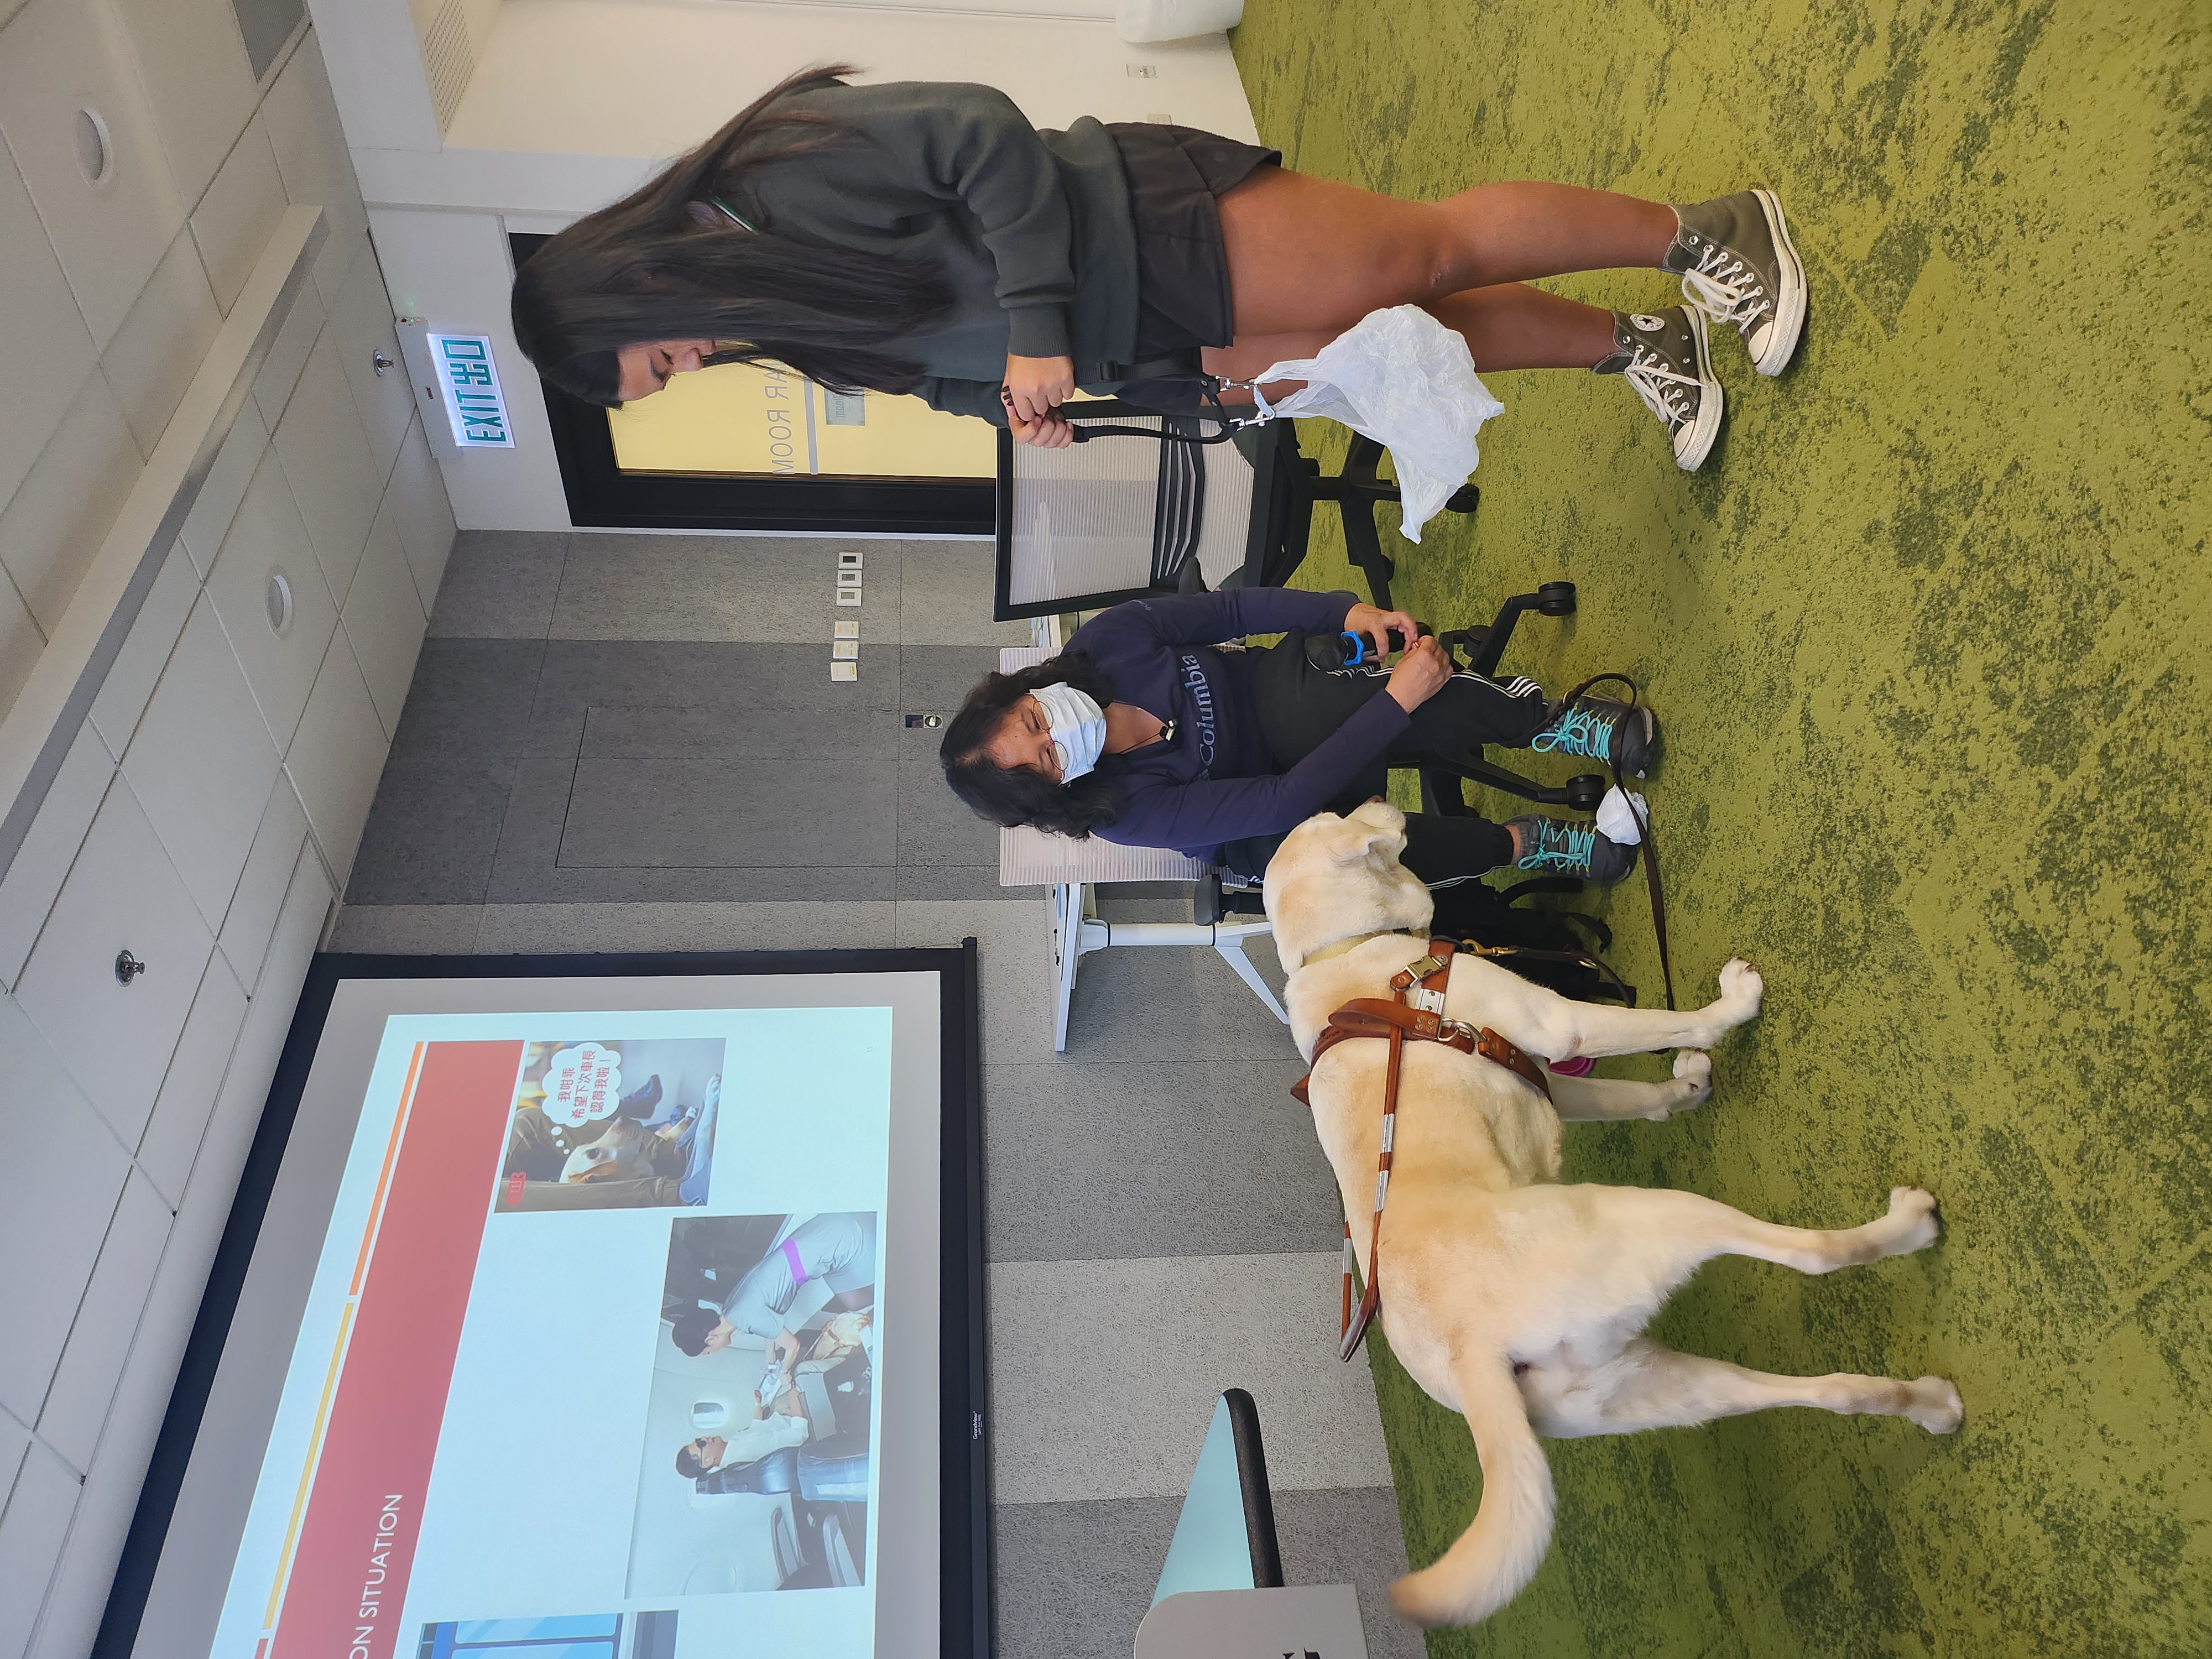 Photo of the interaction between the participant and guide dog